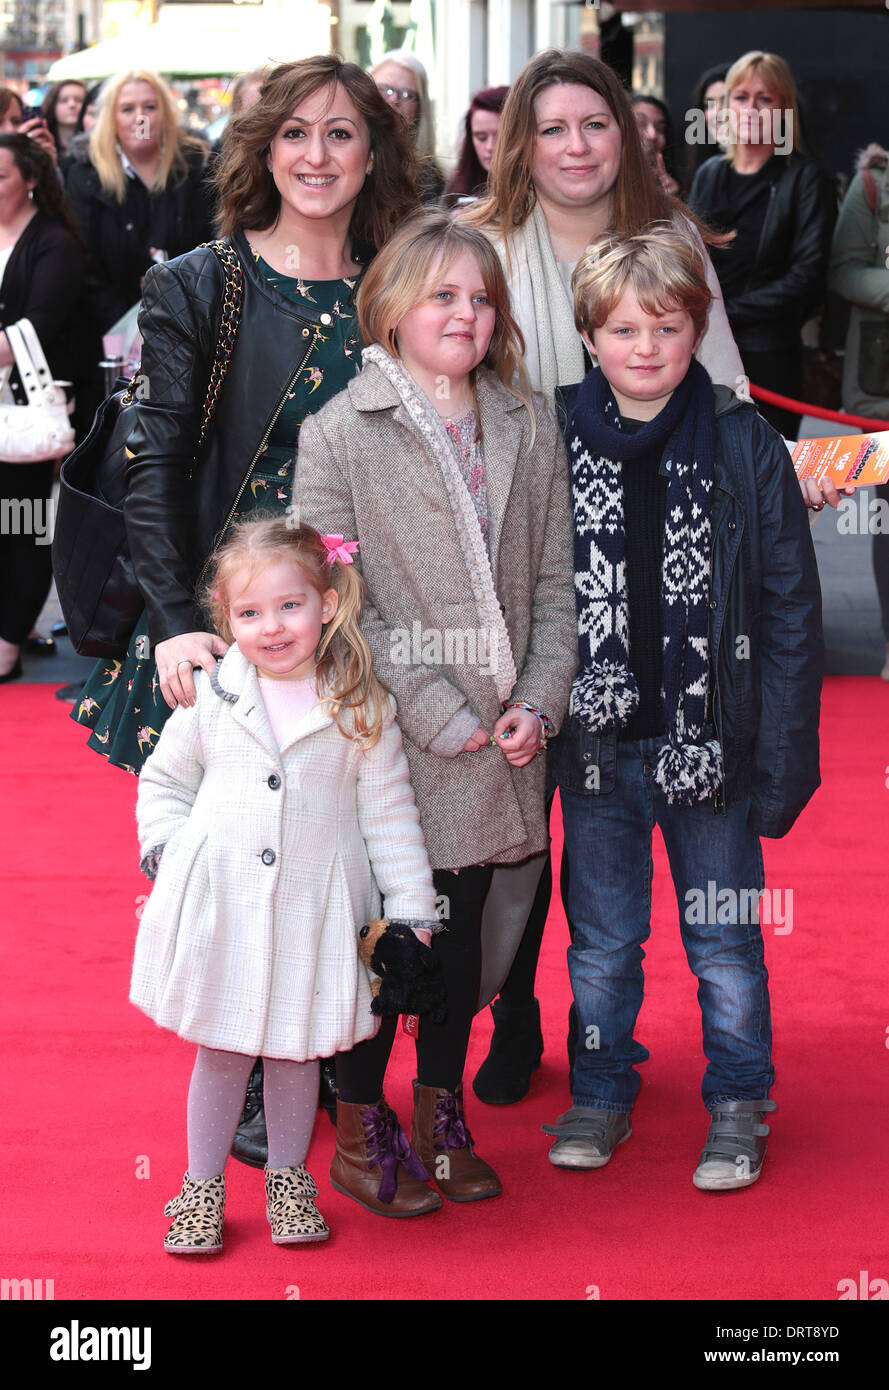 London, UK, 1st February 2014 Natalie Cassidy and family arrive for the VIP Gala screening of 'Mr Peabody & Sherman 3D' at Vue Cinema, Leicester Square, London Photo: MRP Credit:  MRP/Alamy Live News Stock Photo